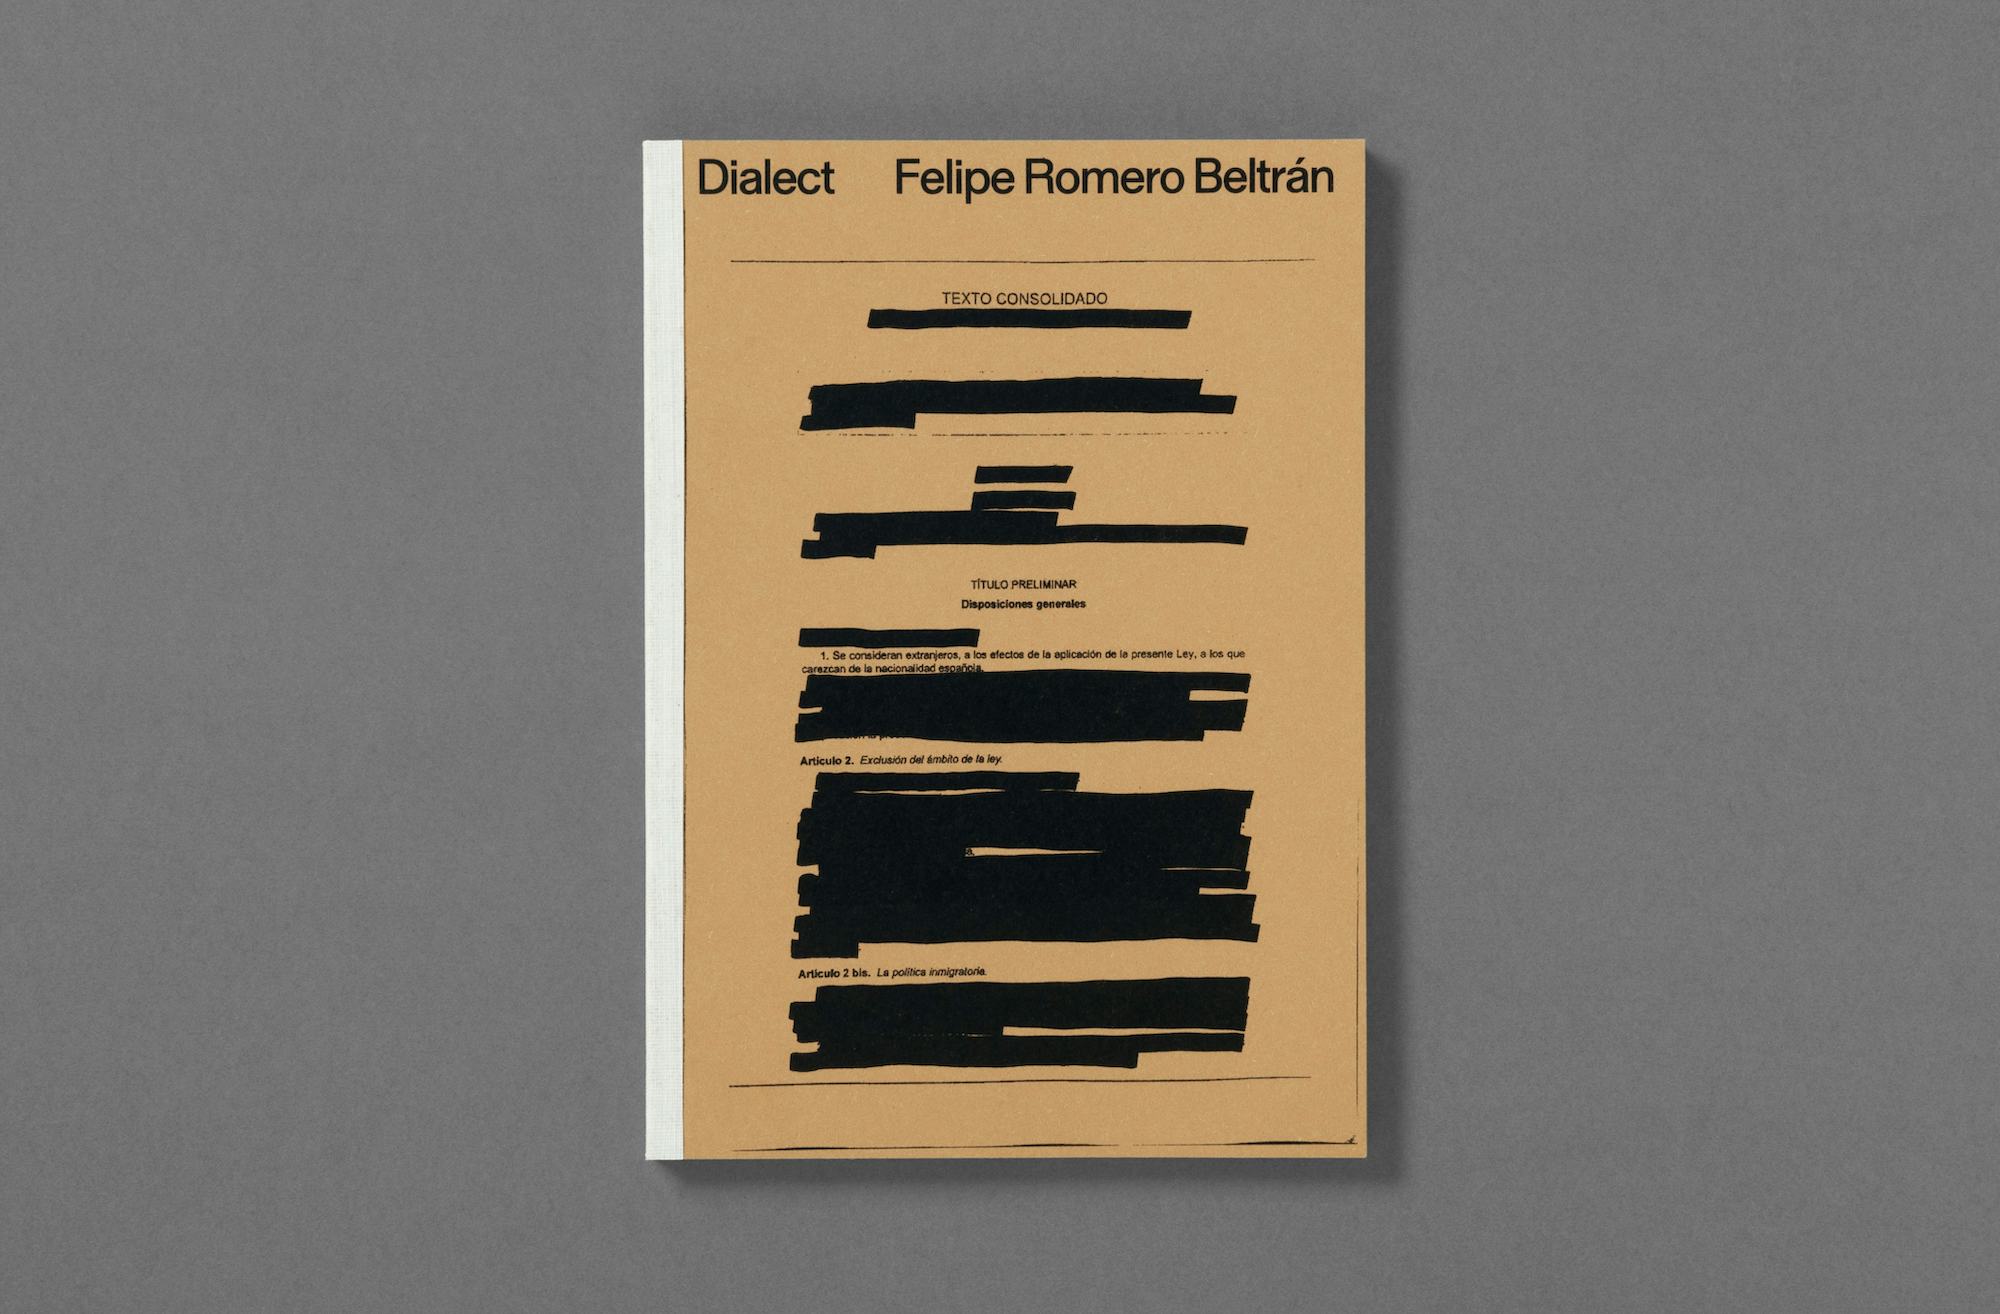 Image of the book cover Dialect by Felipe Romero Beltrán